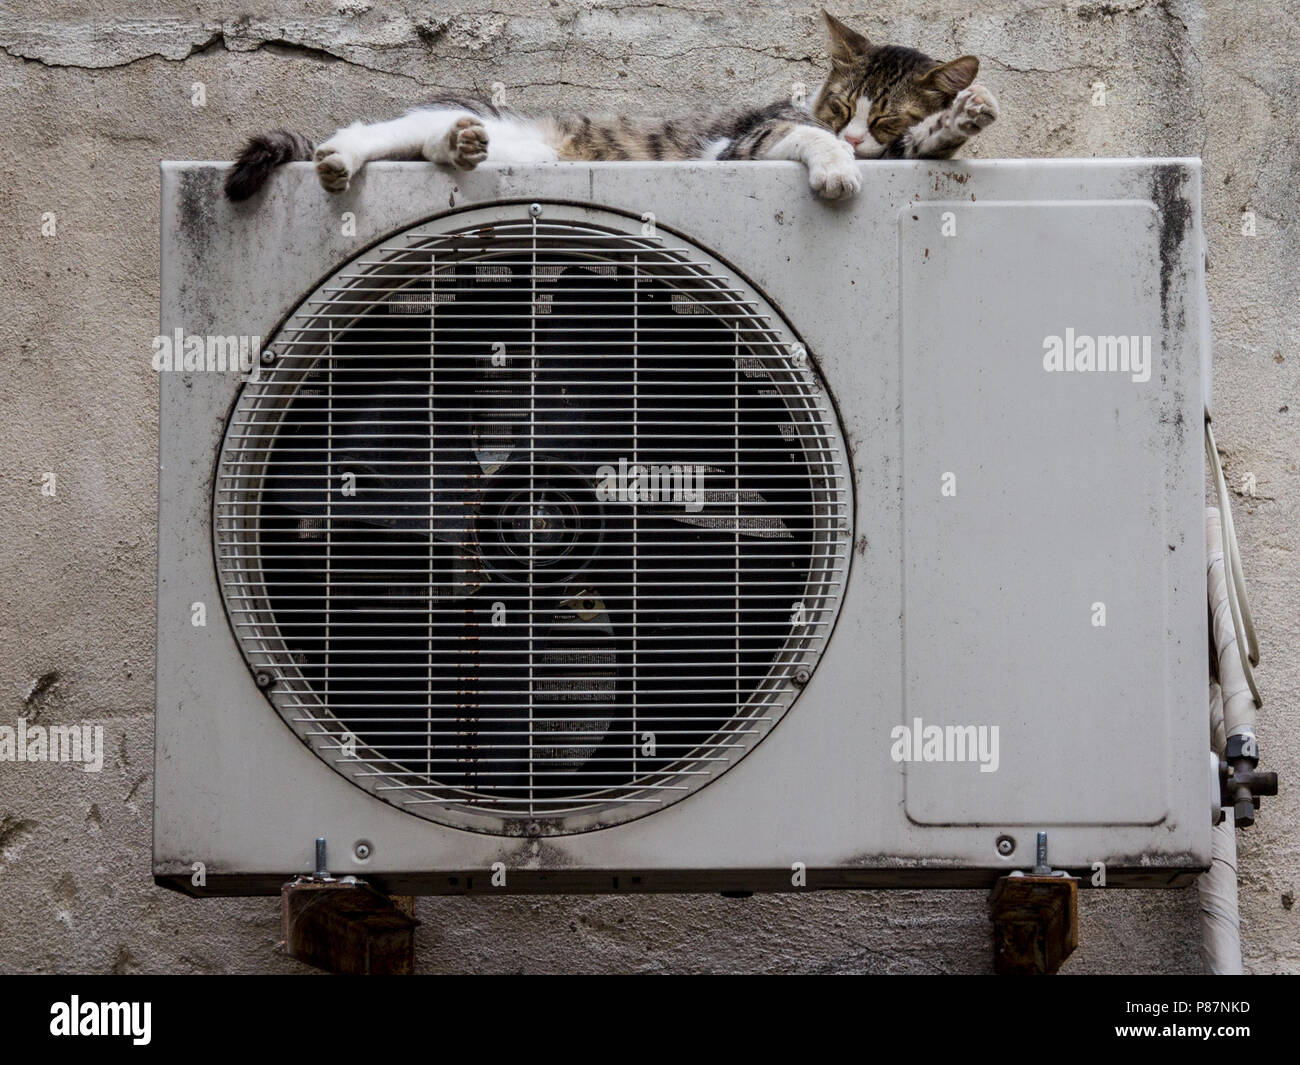 Stray cat in a street sleeping on the condenser unit of an AC air conditioning system  Picture of a white and tabby abandoned street stray cat sleepin Stock Photo